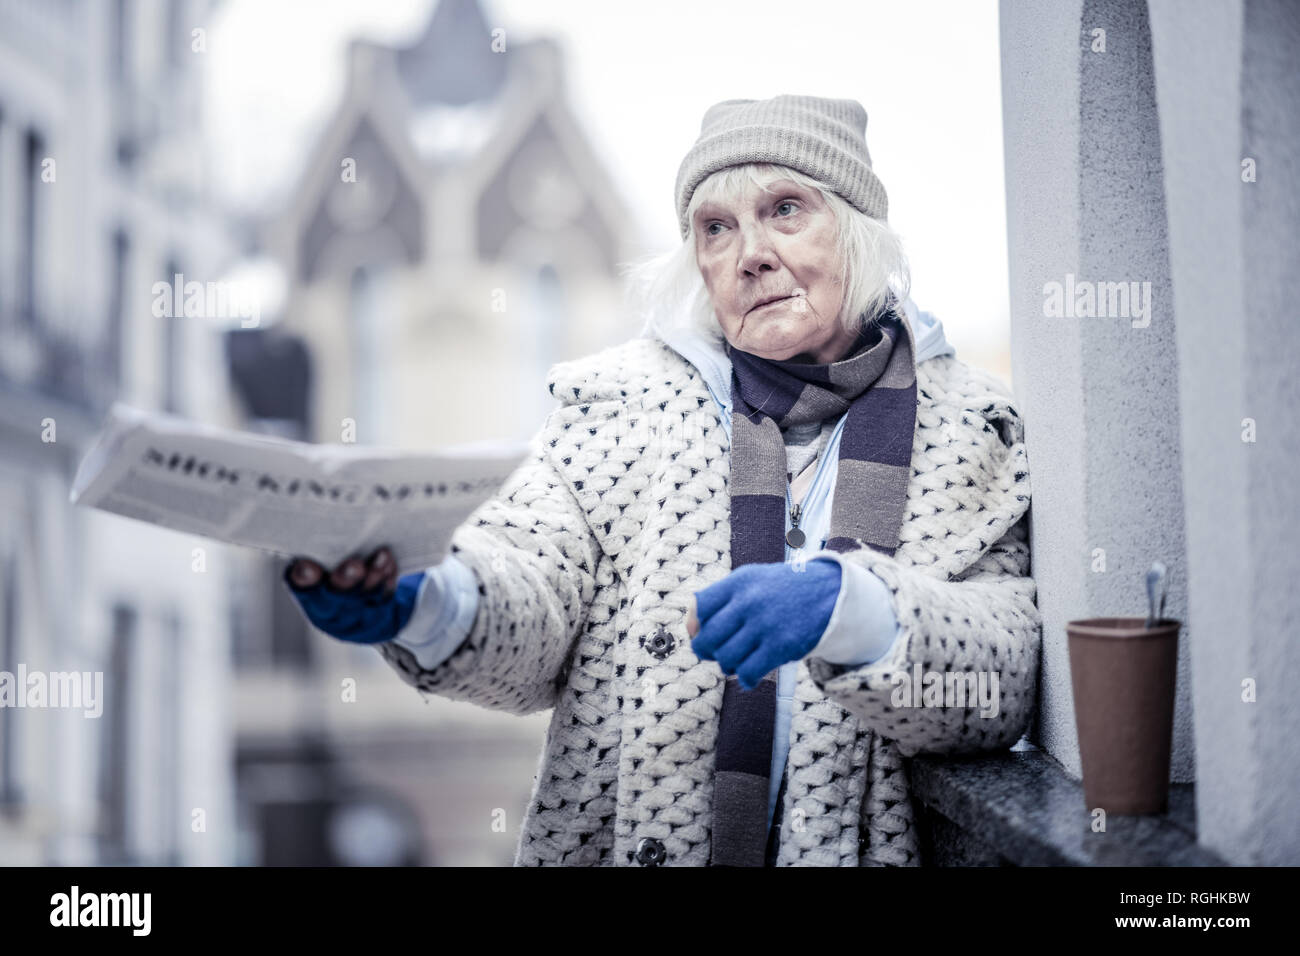 Cheerless aged woman offering newspaper to people Stock Photo